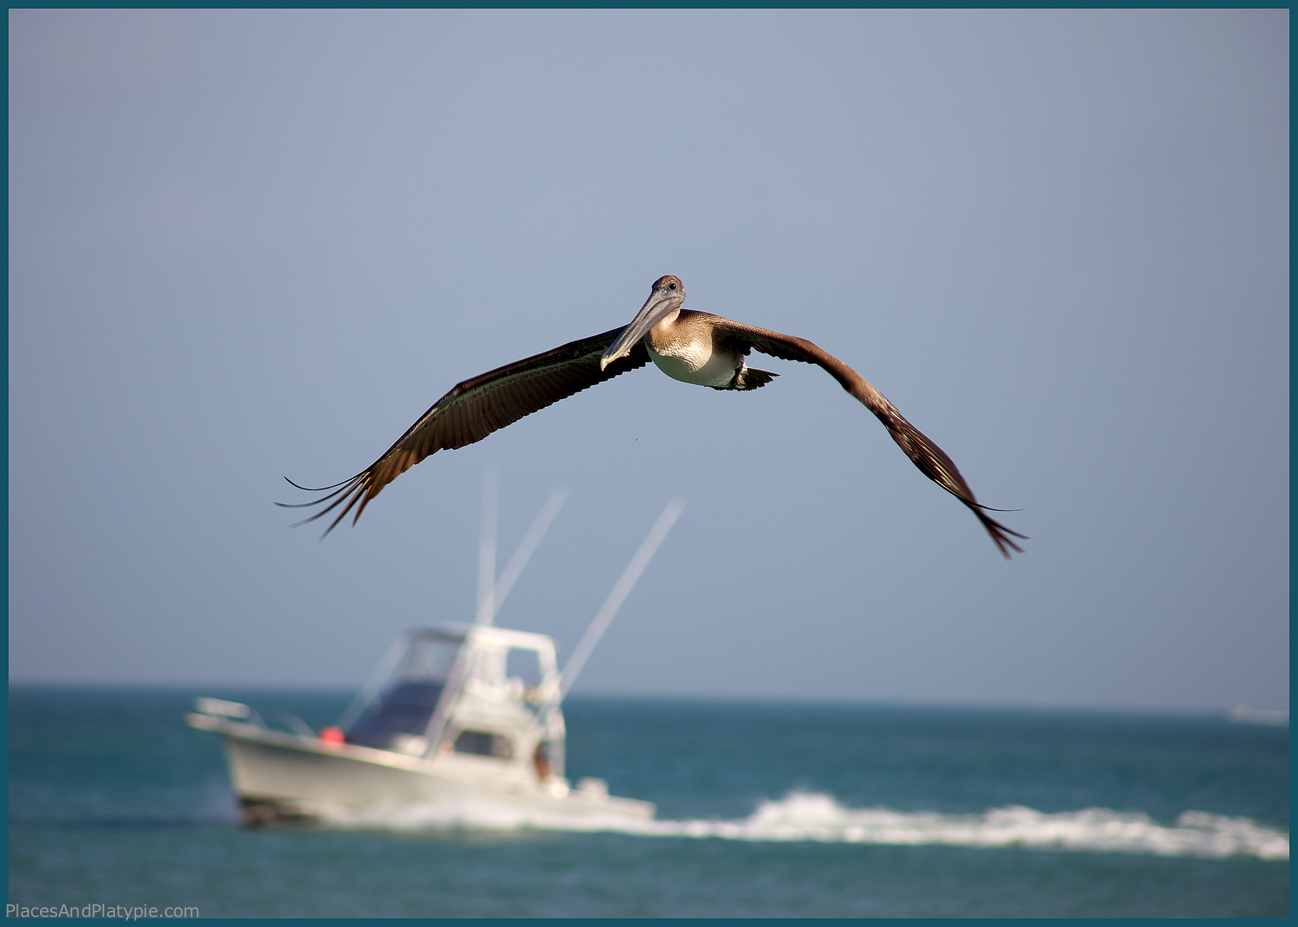 A Brown Pelican leads a fishing boat out into the Gulf of Mexico.